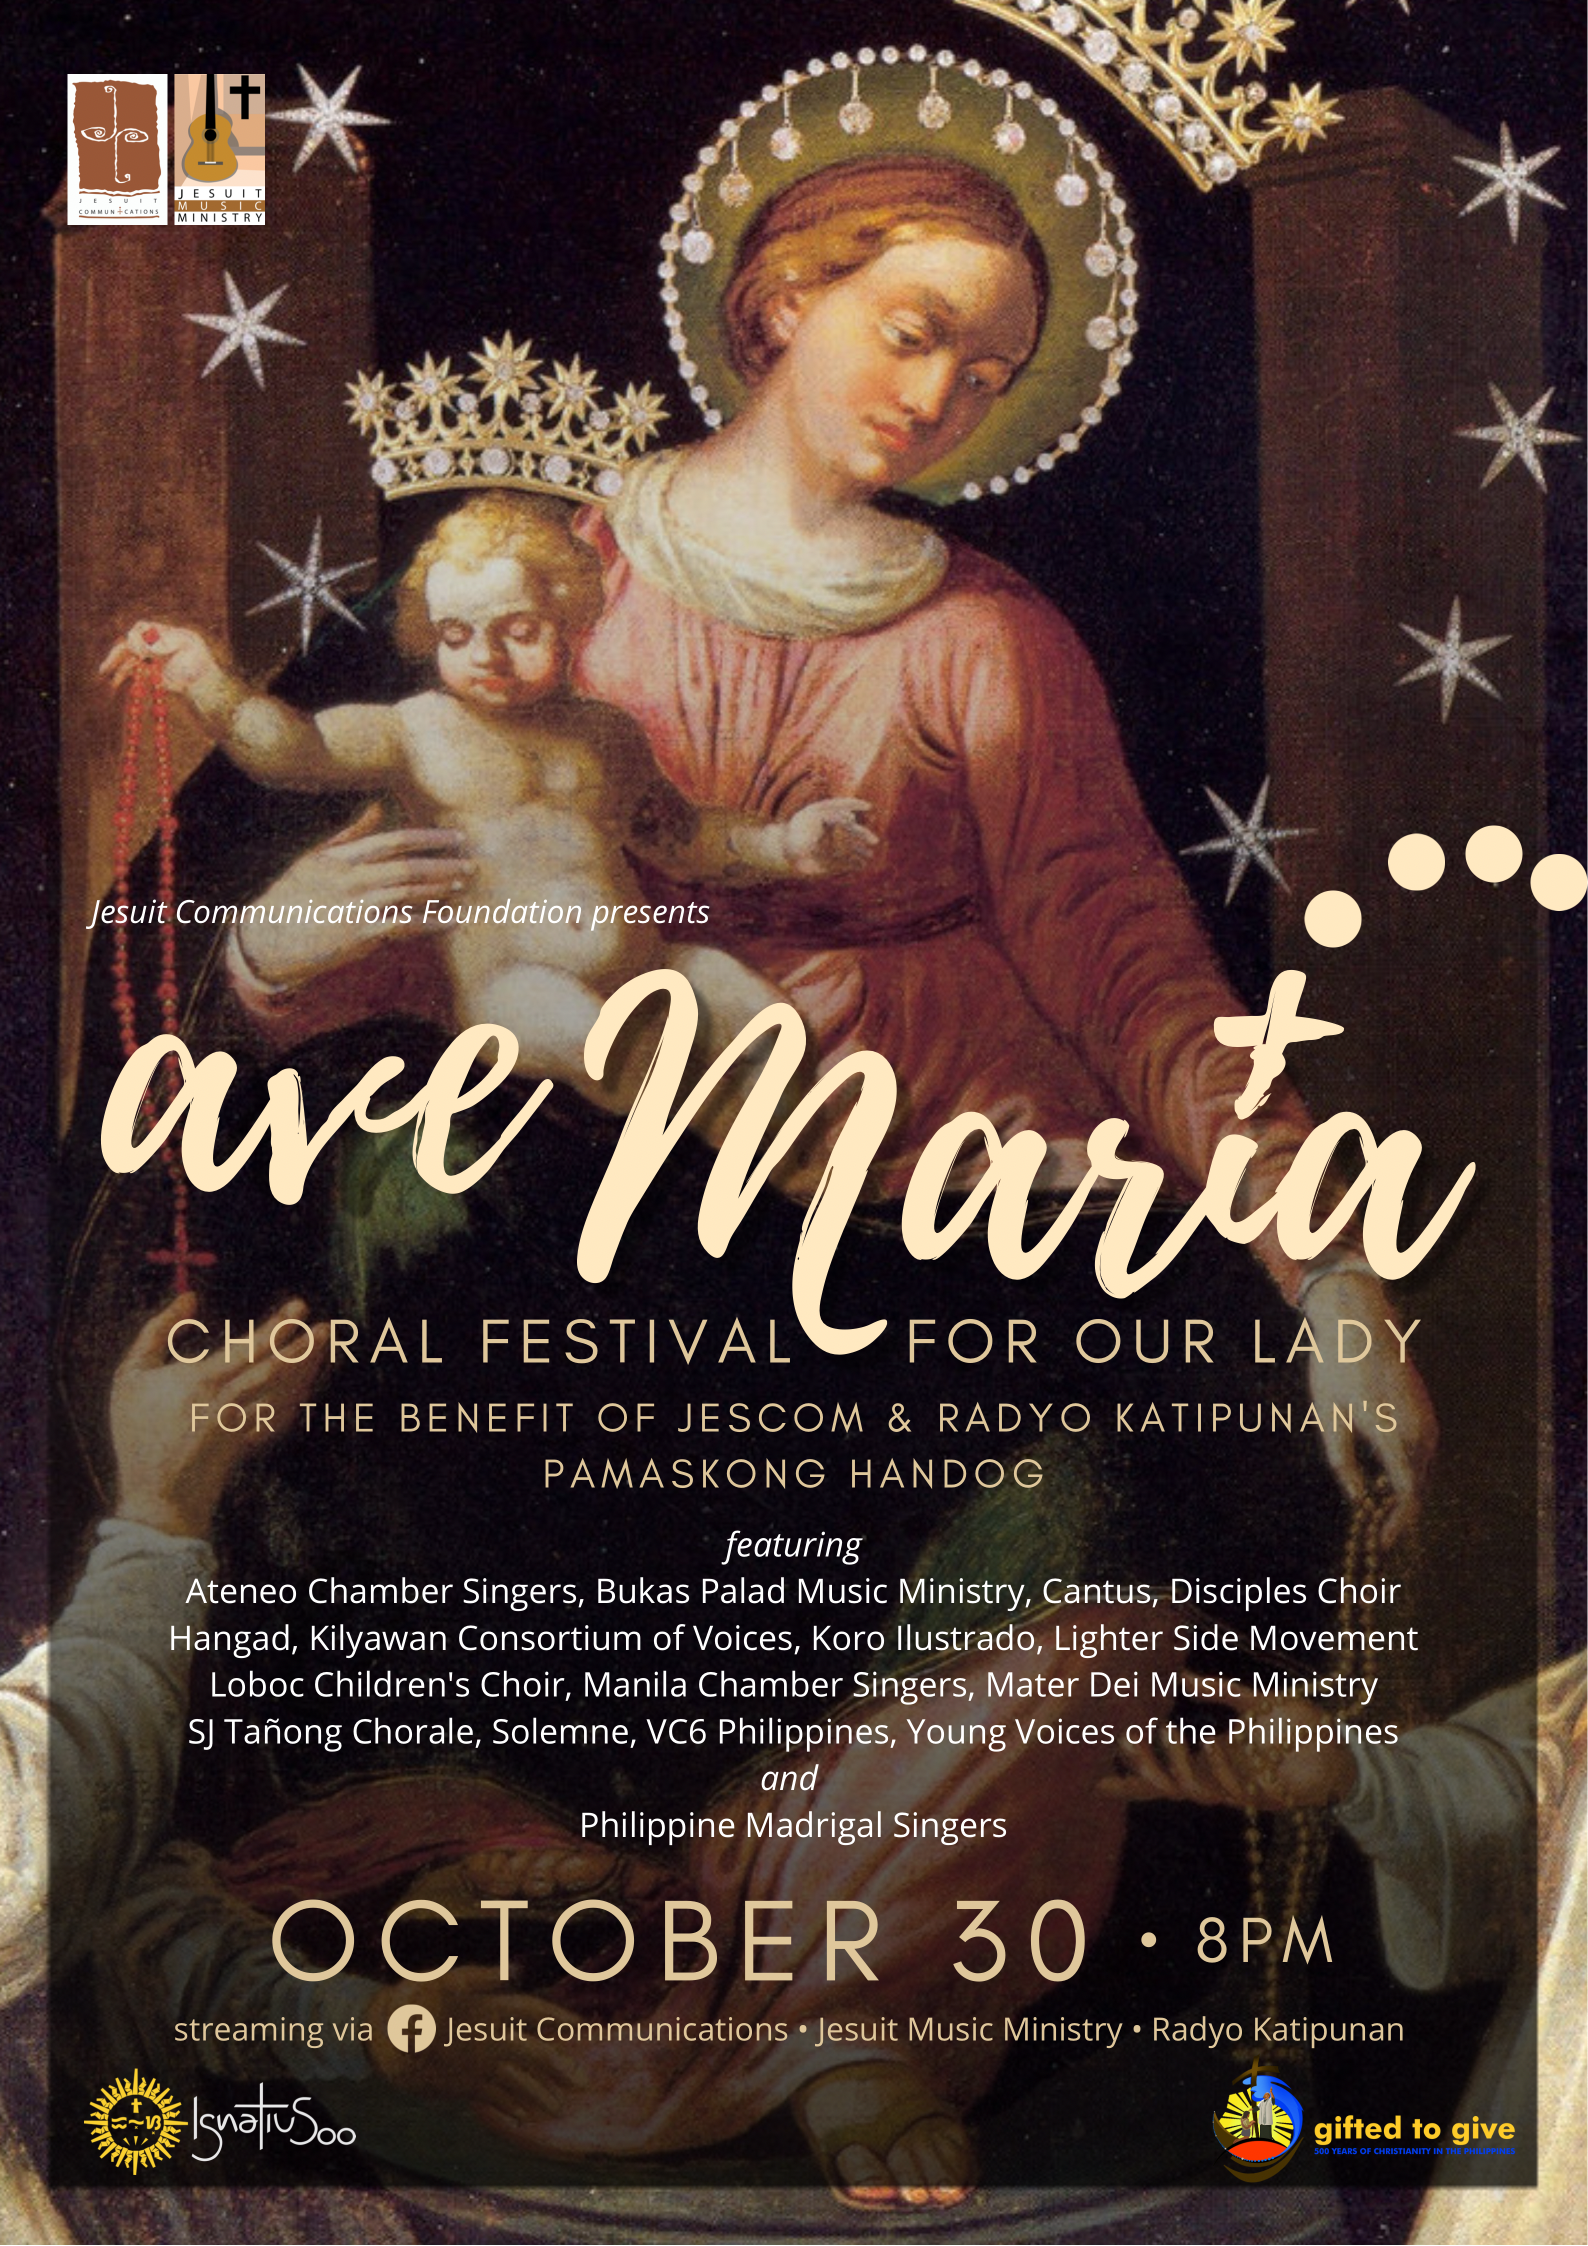 JMM presents “Ave Maria: A Choral Festival for Our Lady” this October